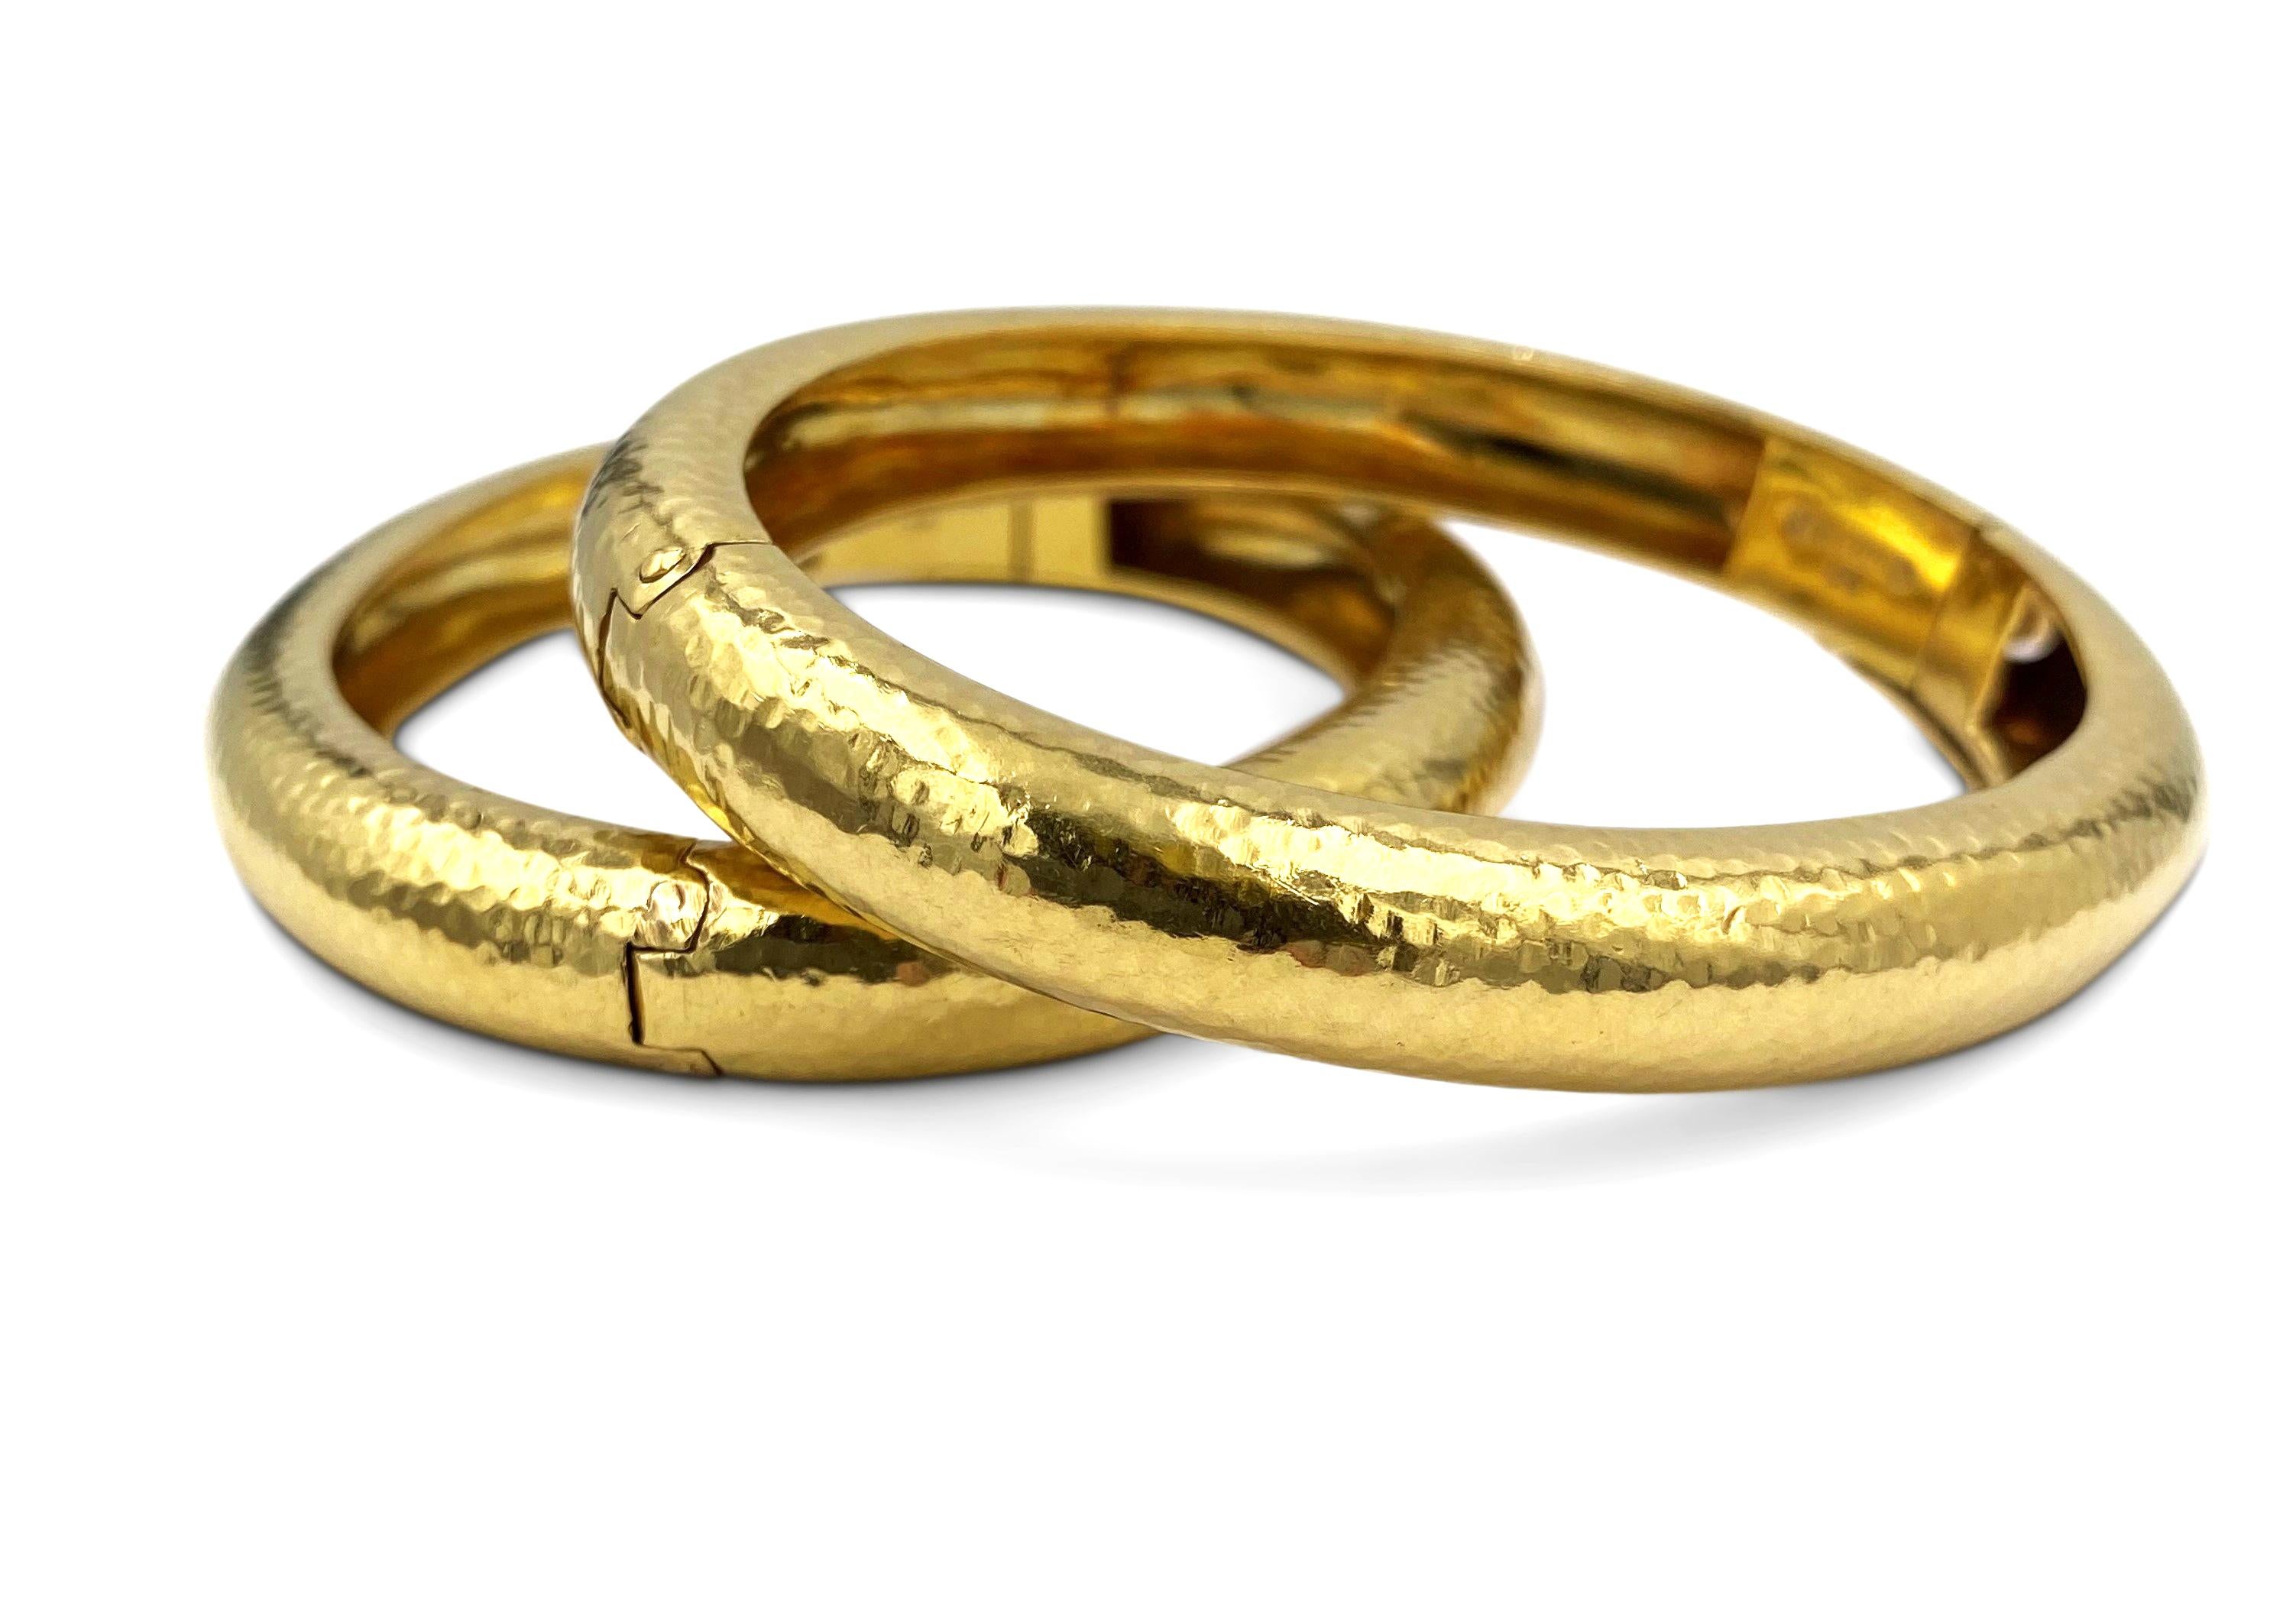 Pair of authentic David Webb hammered gold bangles made in 18 karat yellow gold.  The bracelets are 2 1/4 inches in diameter and can fit up to a size 5 1/2 wrist.  Signed Webb, 18K.  Bangles do not come with original box or papers. CIRCA 1970